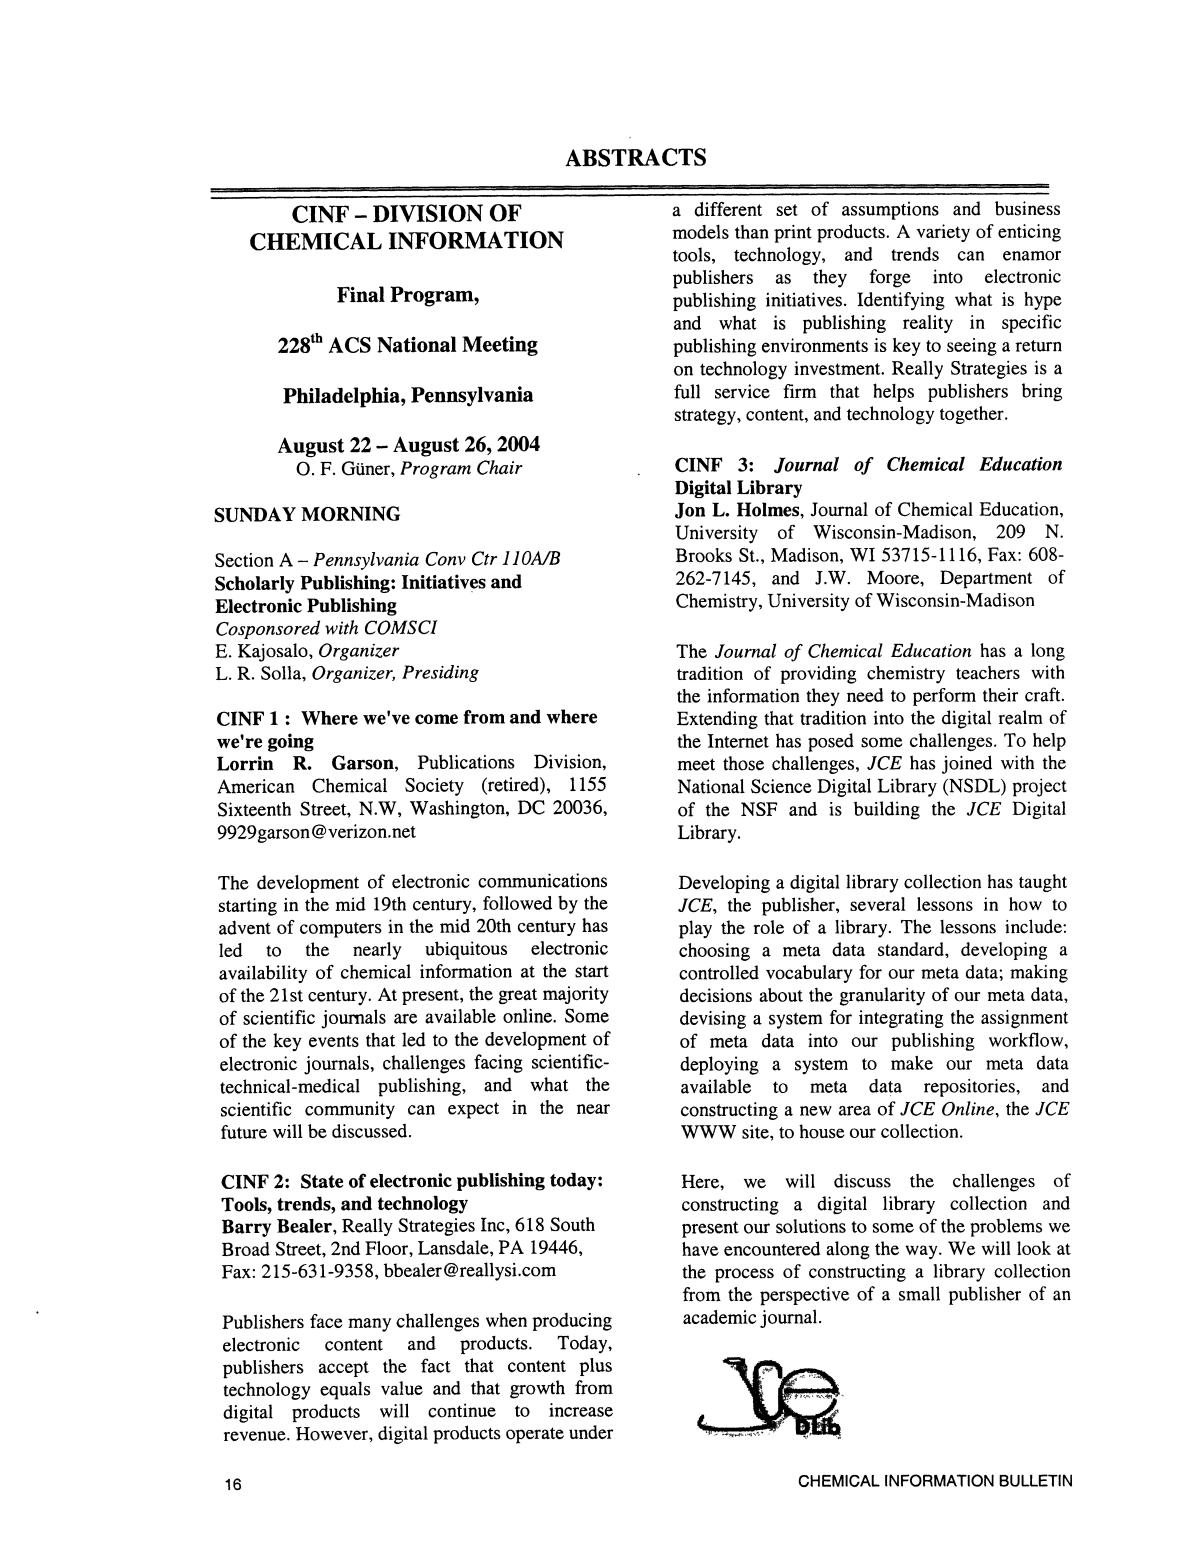 Chemical Information Bulletin, Volume 56, Number 2, Fall 2004
                                                
                                                    16
                                                